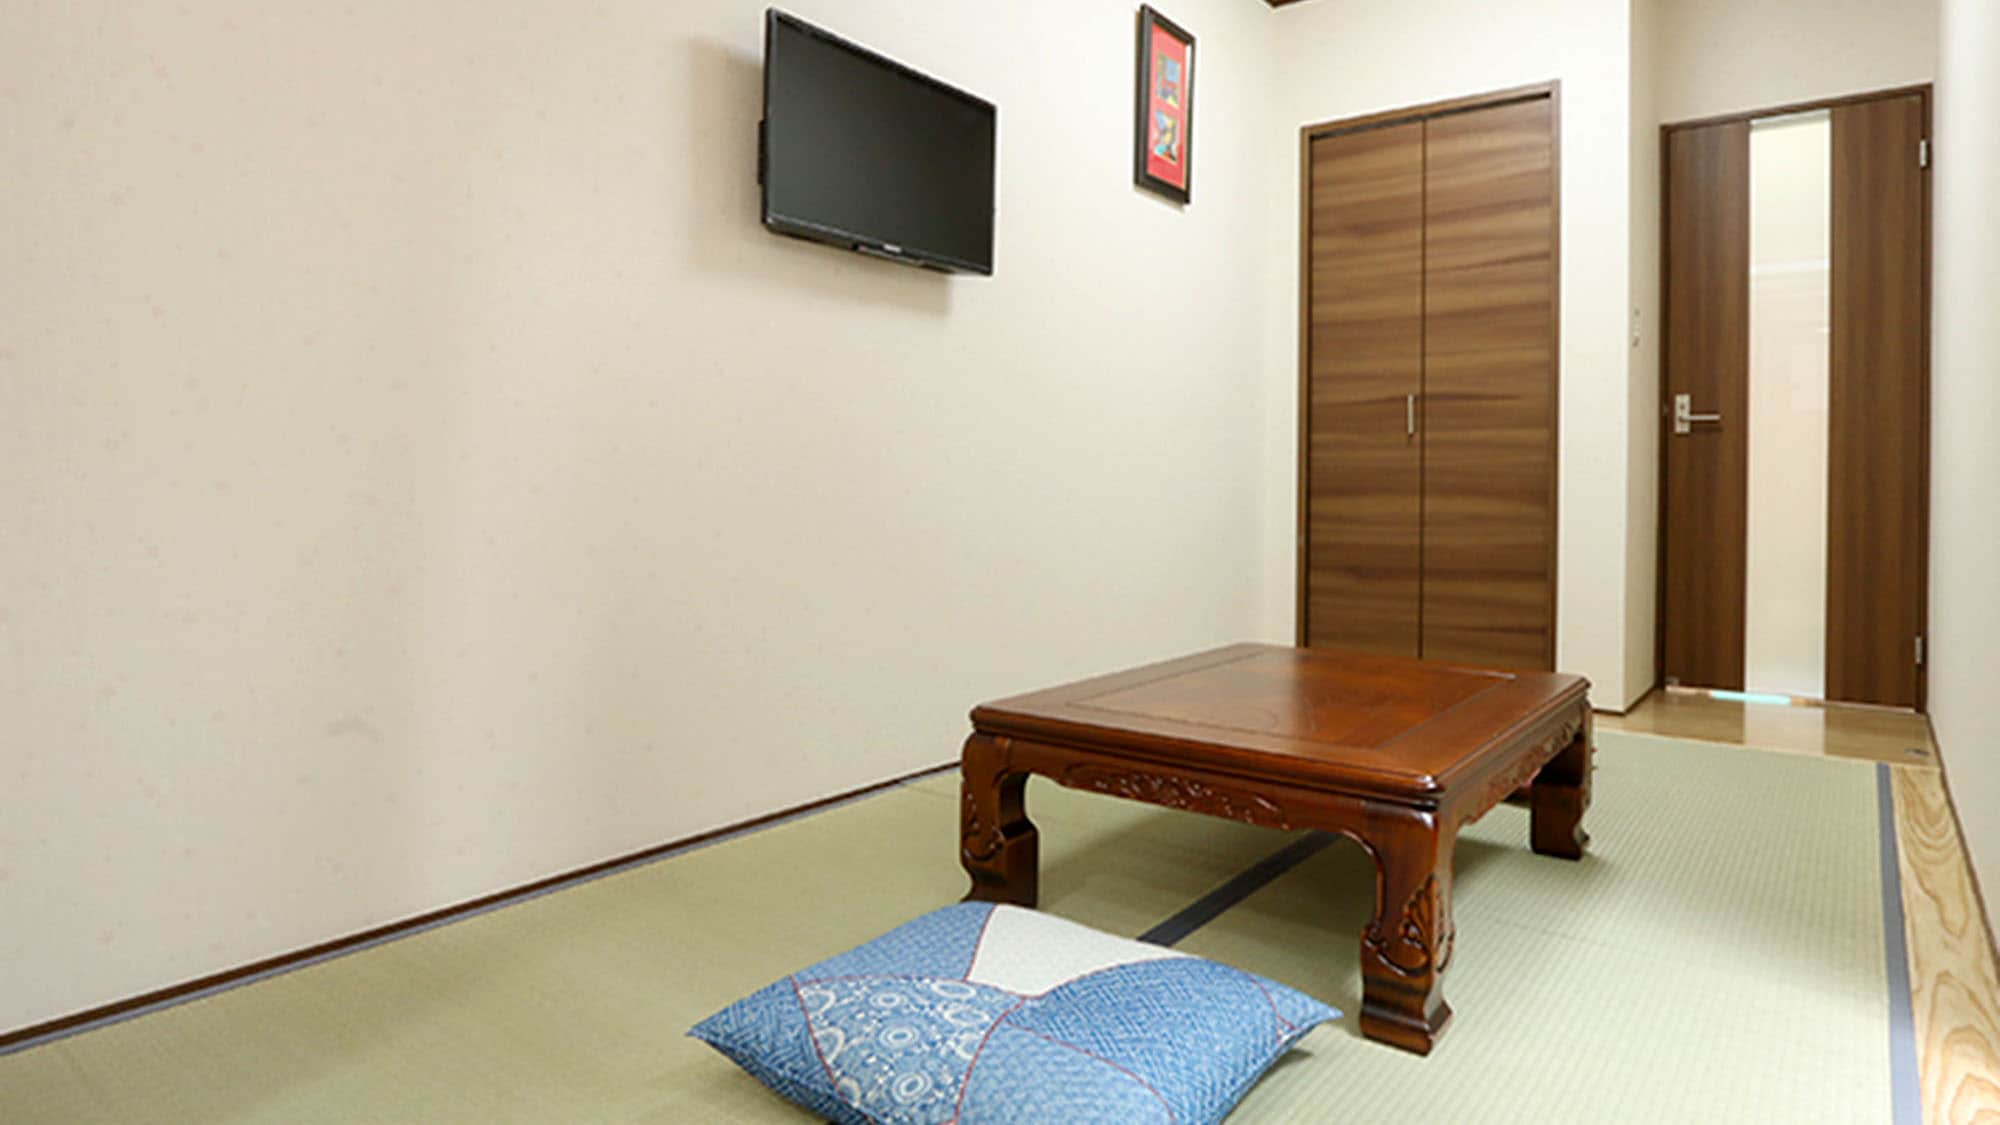 ・ "Sumire / Maple" room: Compact living space